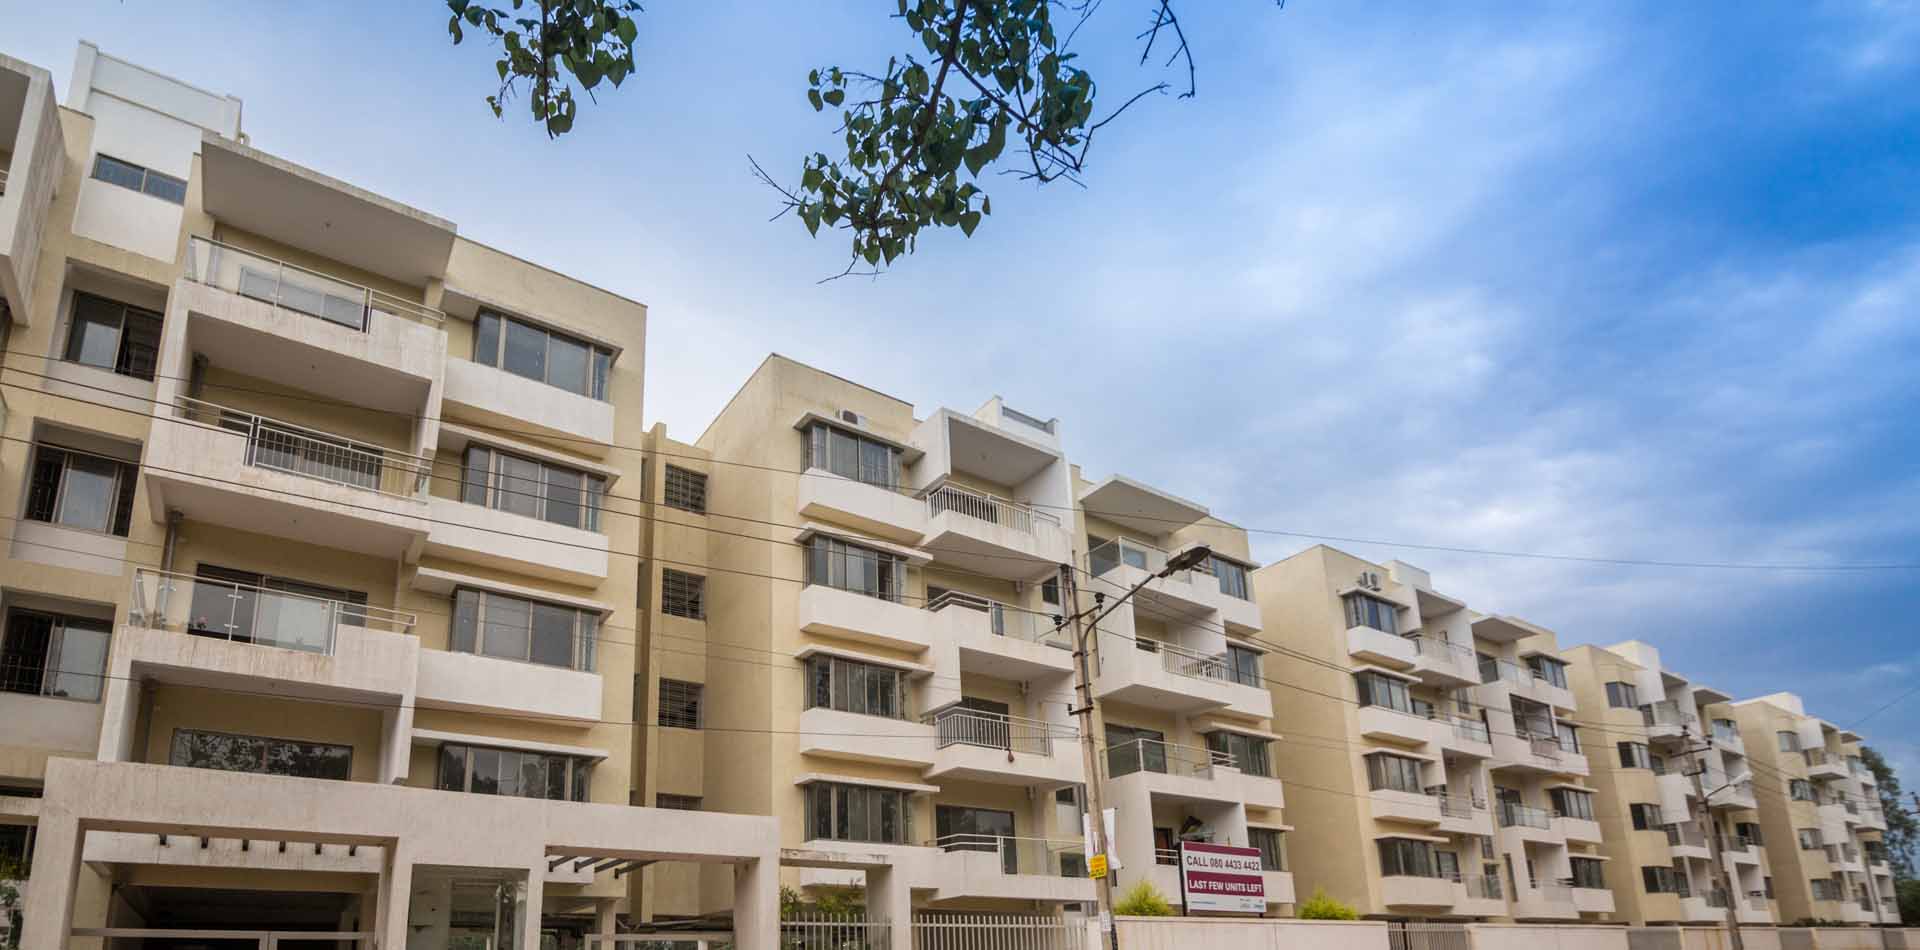 Century Linea luxury apartments in Amrutahalli have homes with two sides open spaces